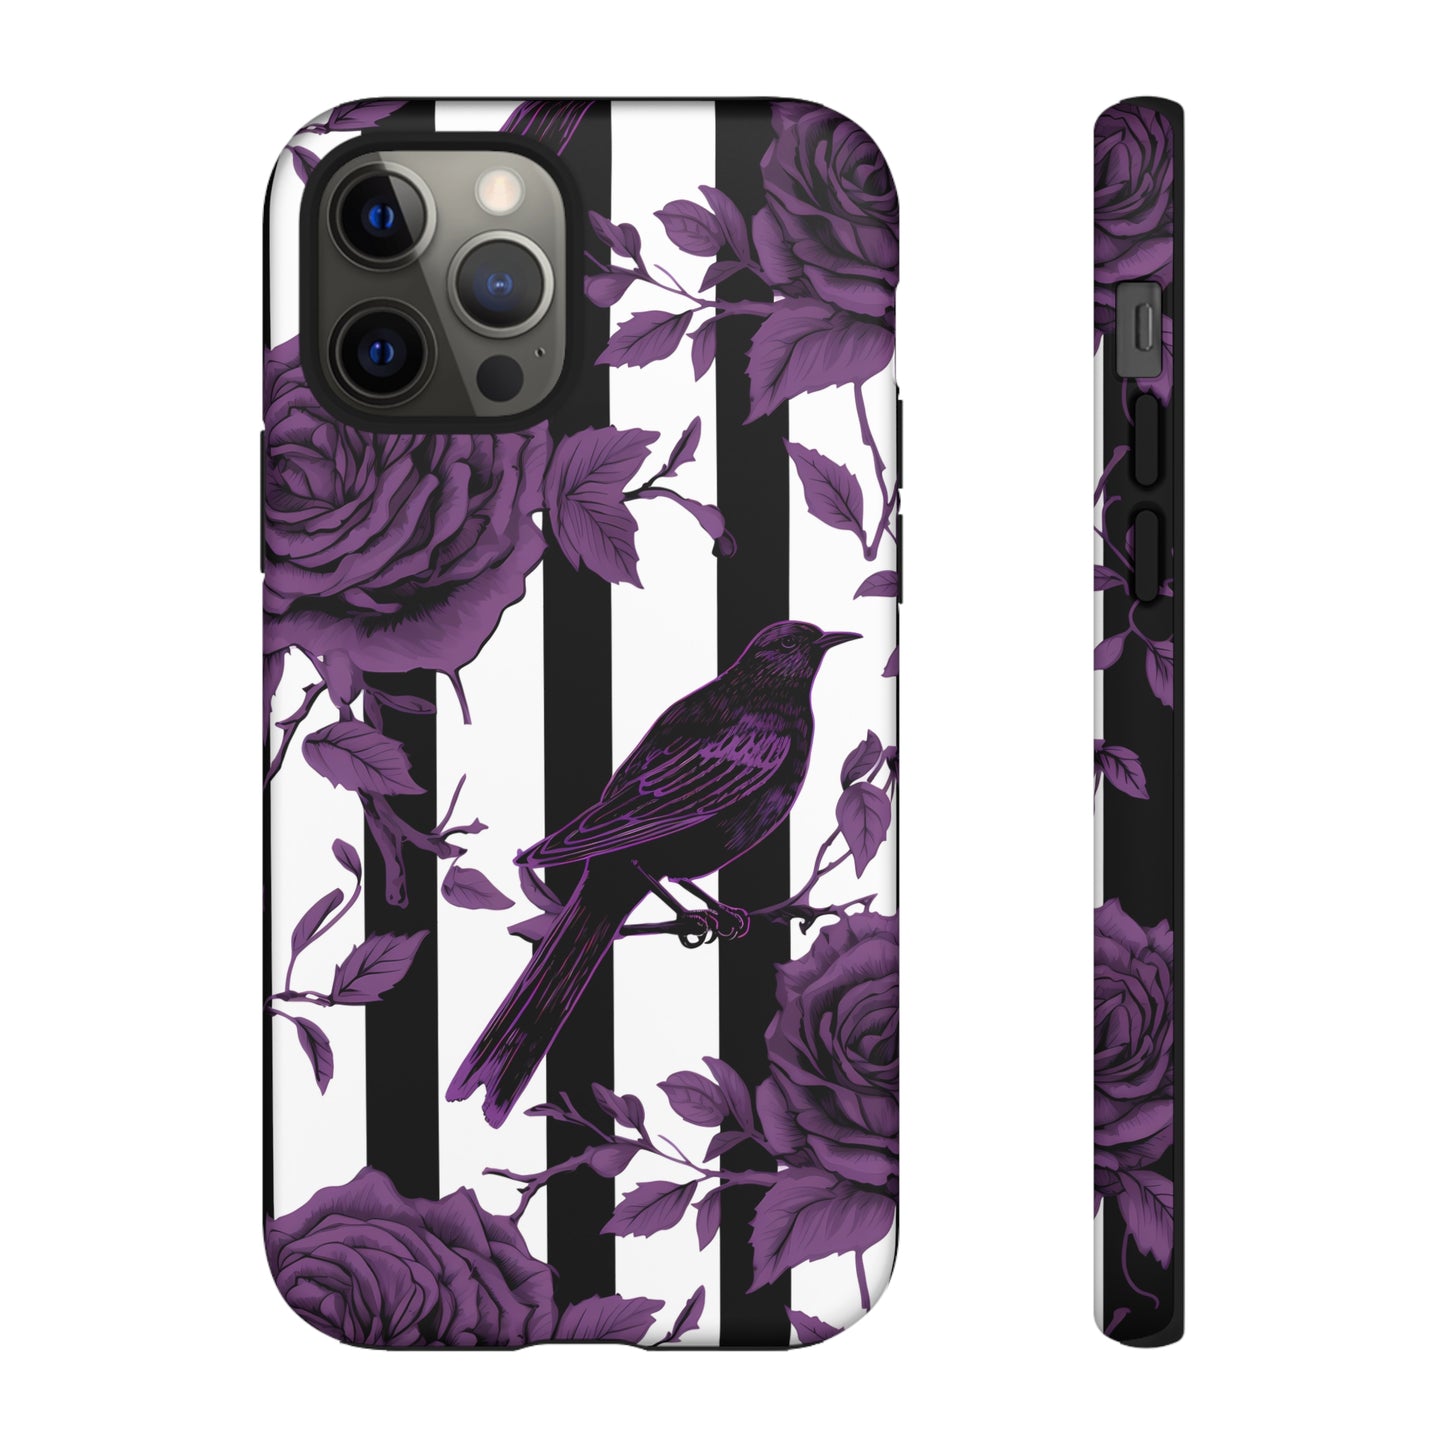 Striped Crows and Roses Tough Cases for iPhone Samsung Google PhonesPhone CaseVTZdesignsiPhone 12 ProMatteAccessoriescrowsGlossy